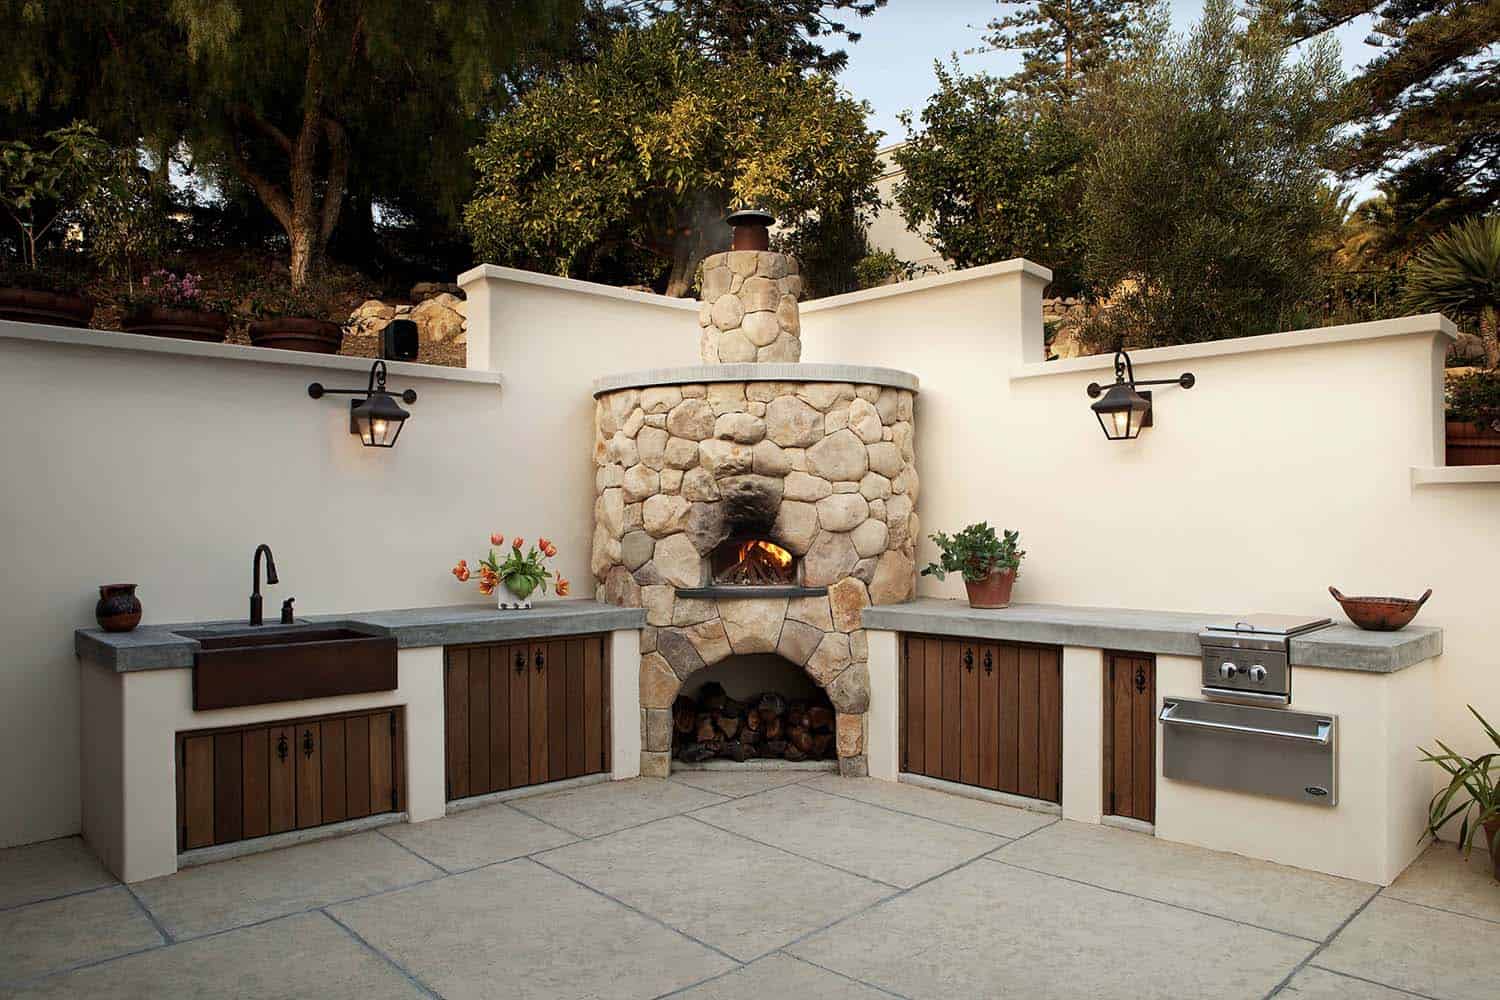 mediterranean style patio with an outdoor kitchen and pizza oven